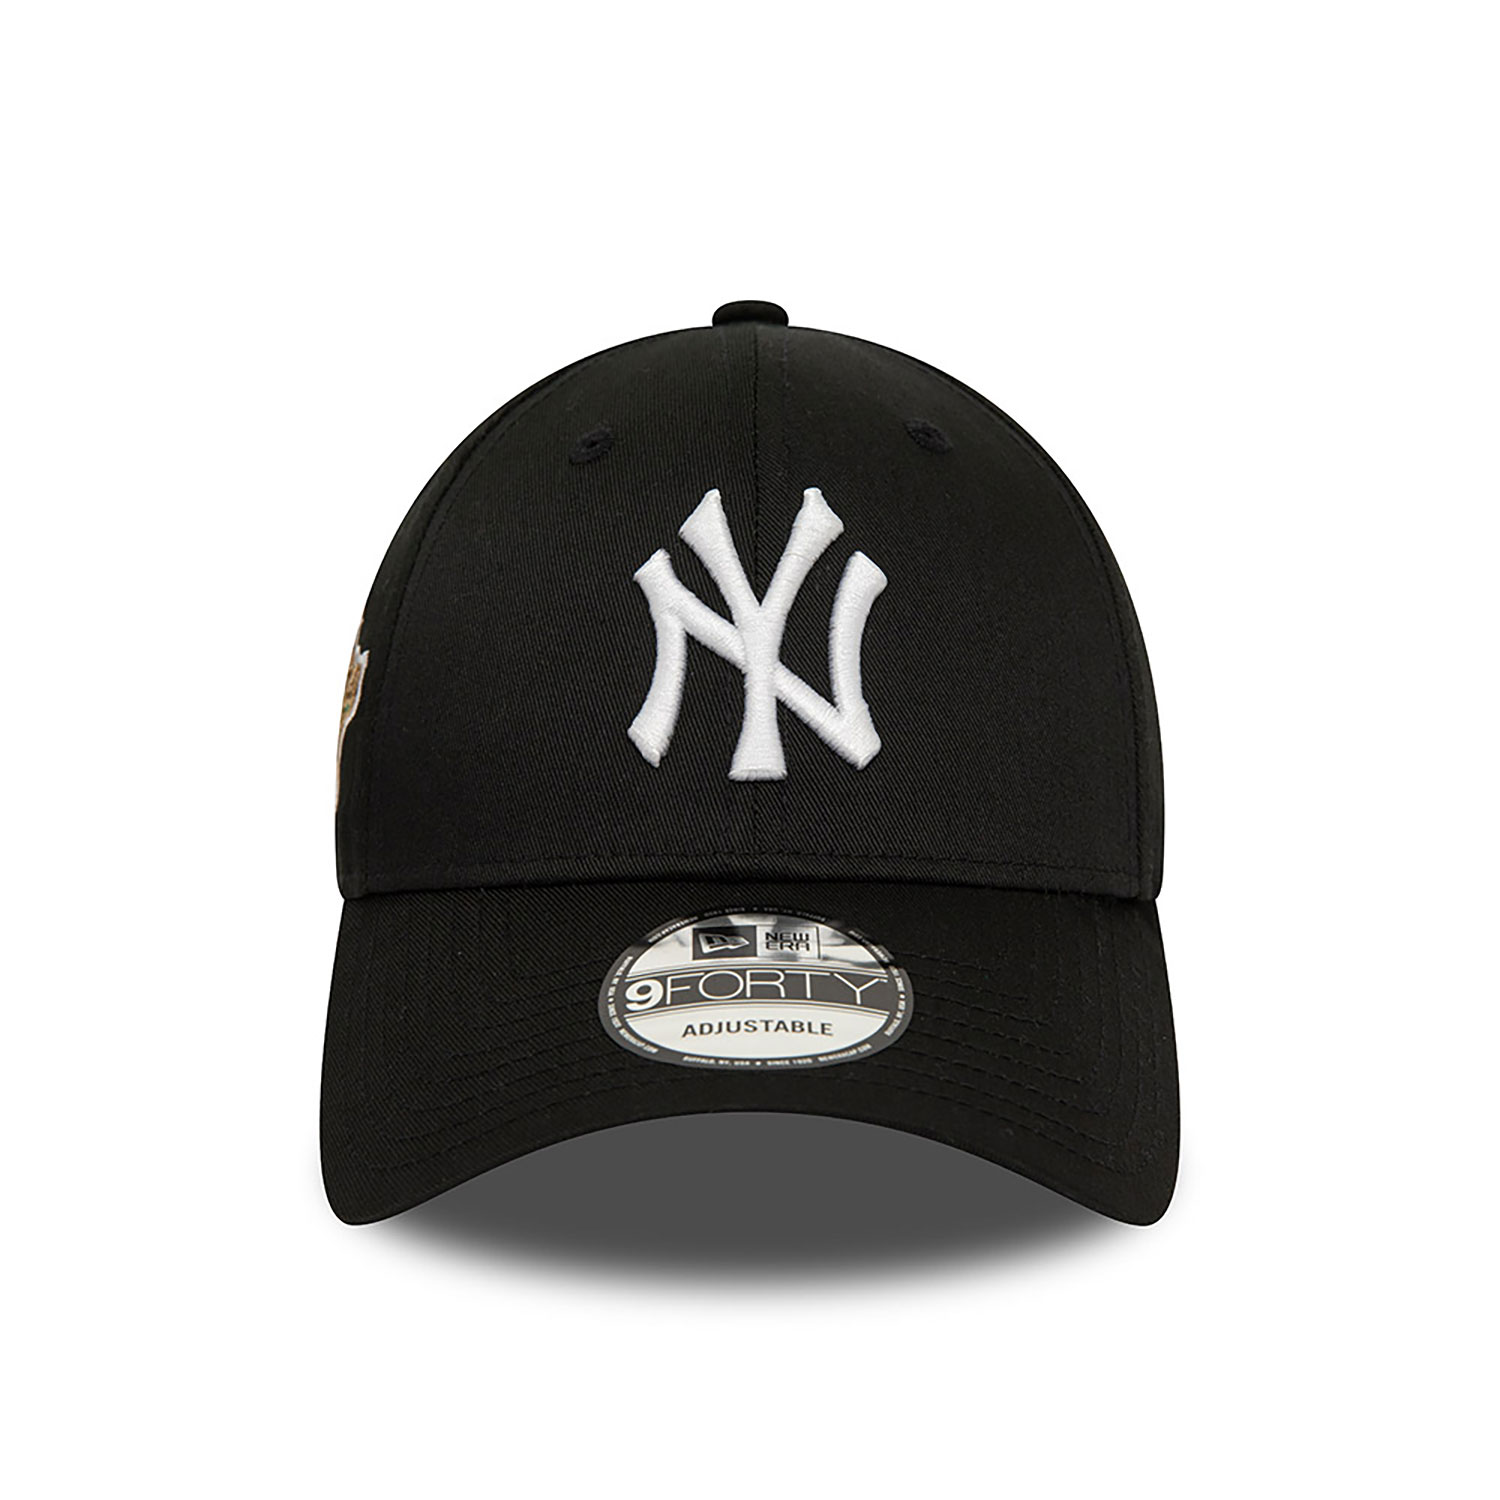 New York Yankees World Series Patch Black 9FORTY Adjustable Cap